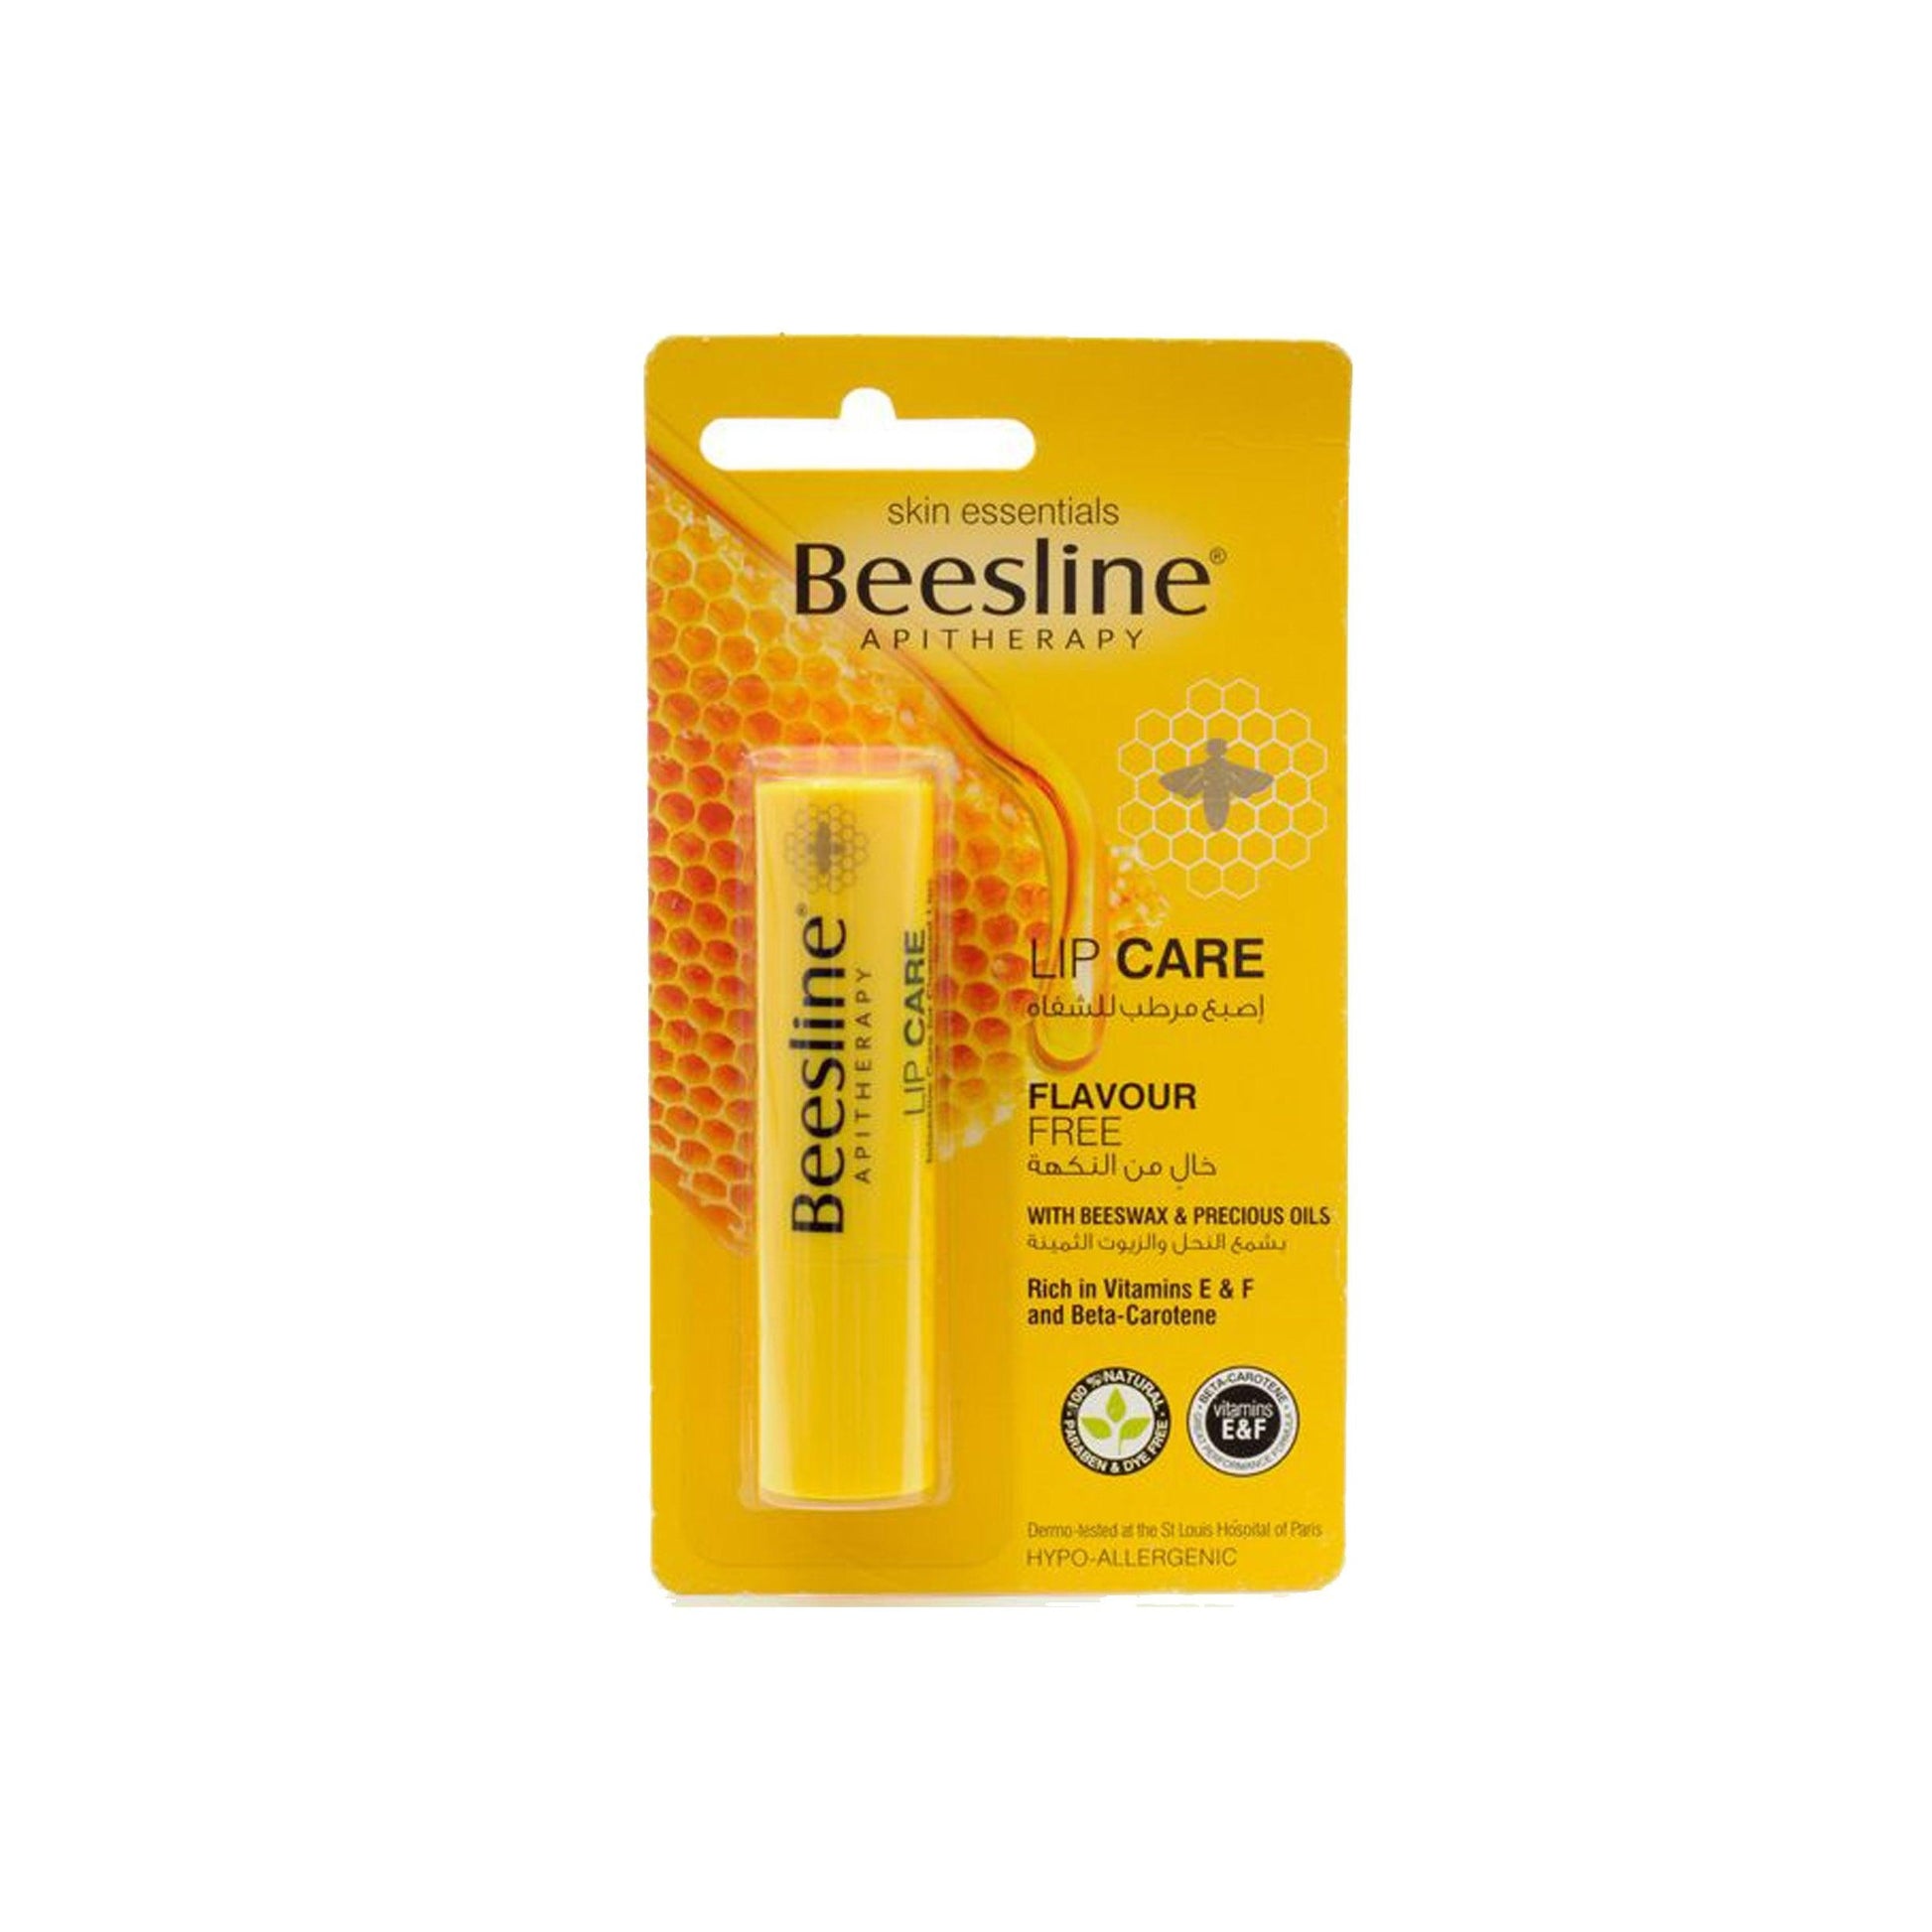 Beesline Lip Care Flavour Free 4 G - Beauty Bounty